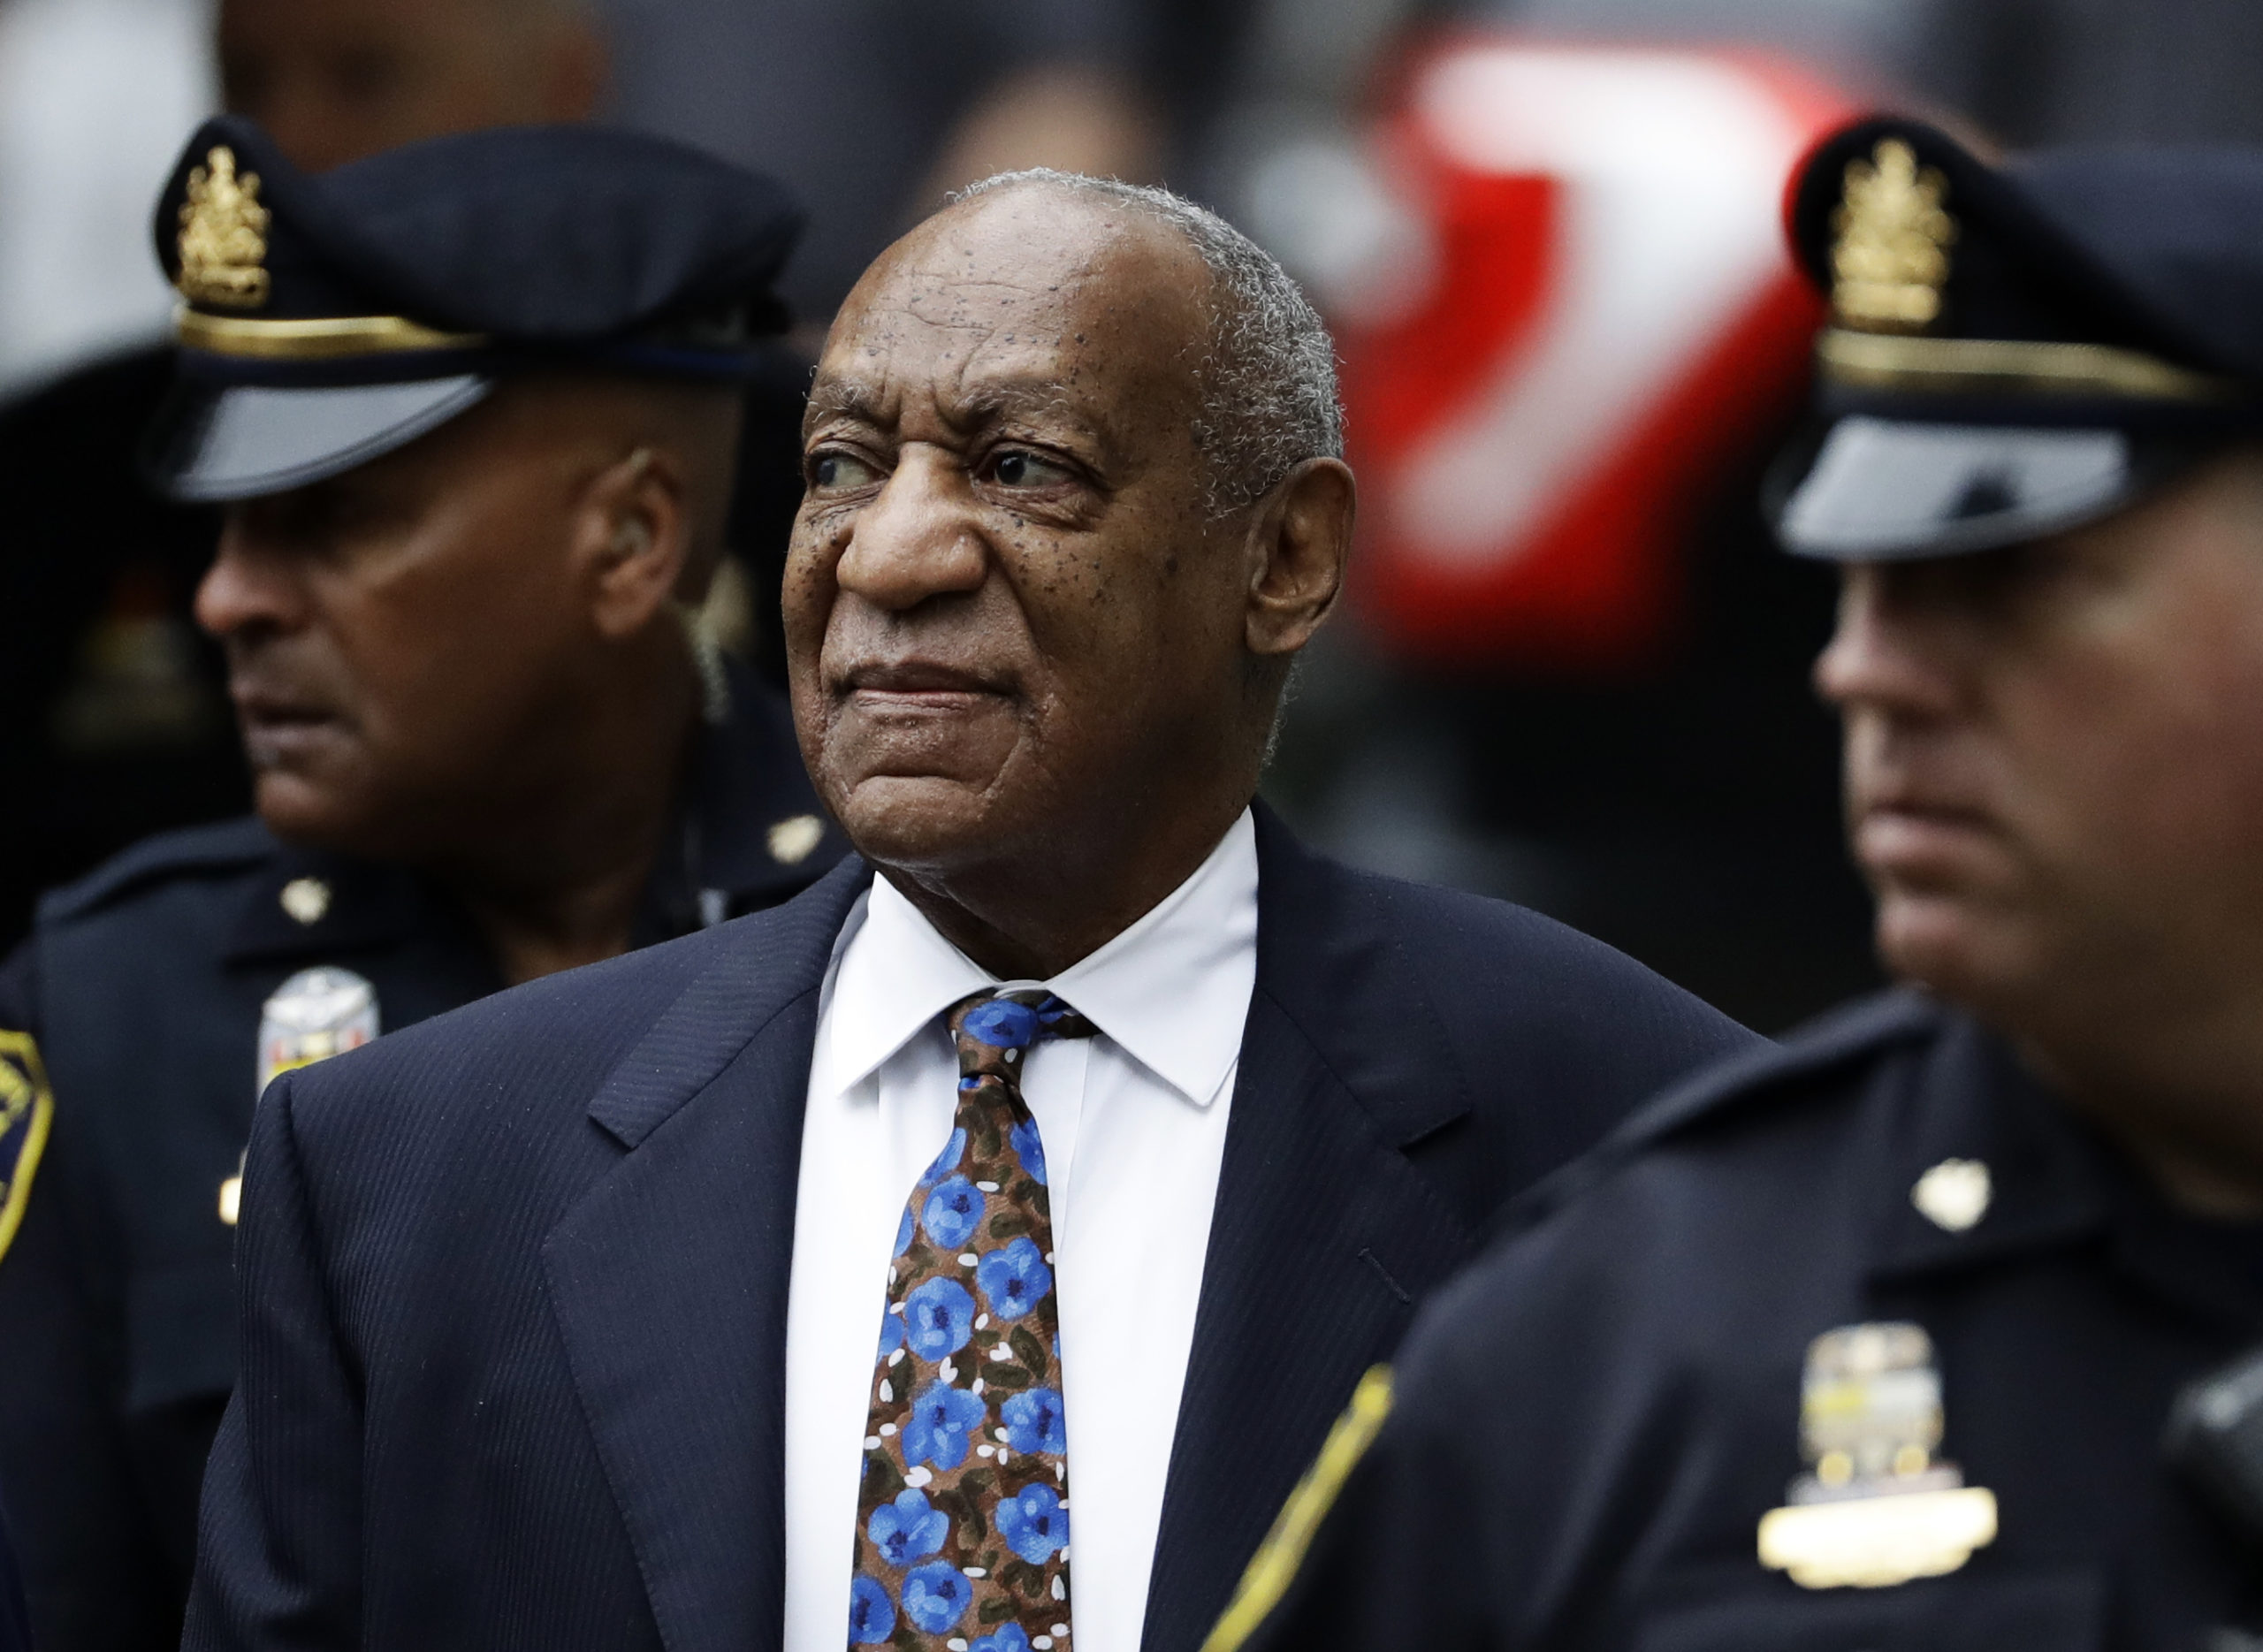 Bill Cosby arrives for his sentencing hearing at the Montgomery County Courthouse on Sept. 24, 2018, in Norristown, Pennsylvania. Prosecutors asked the U.S. Supreme Court to review the decision that overturned Cosby’s conviction. In a petition filed Monday, they wrote that courts should not equate a supposed promise made by a former prosecutor to lifetime immunity.